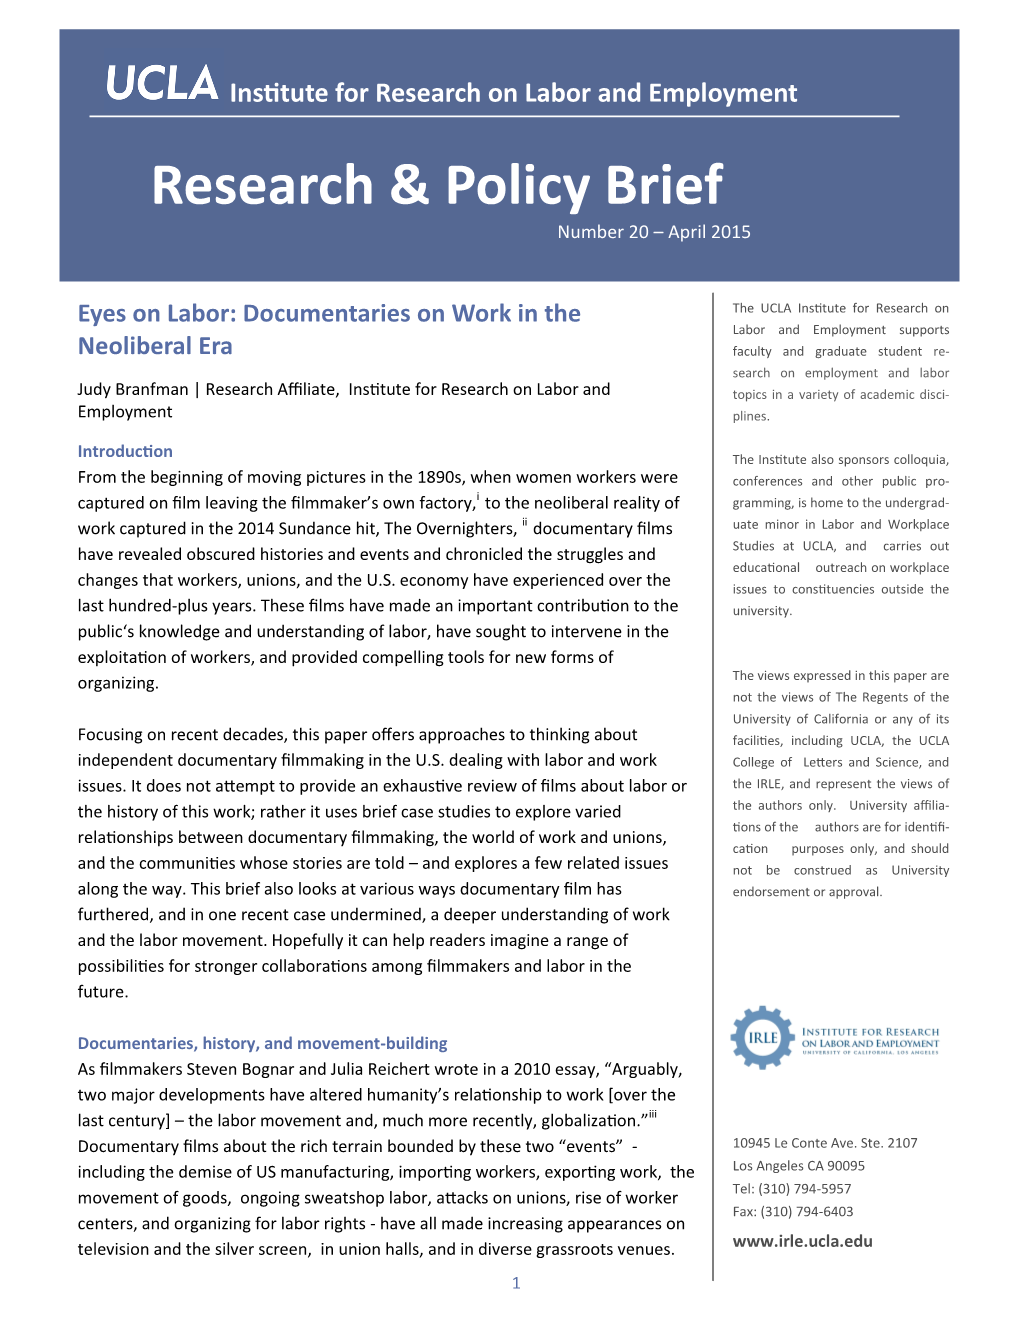 Research & Policy Brief